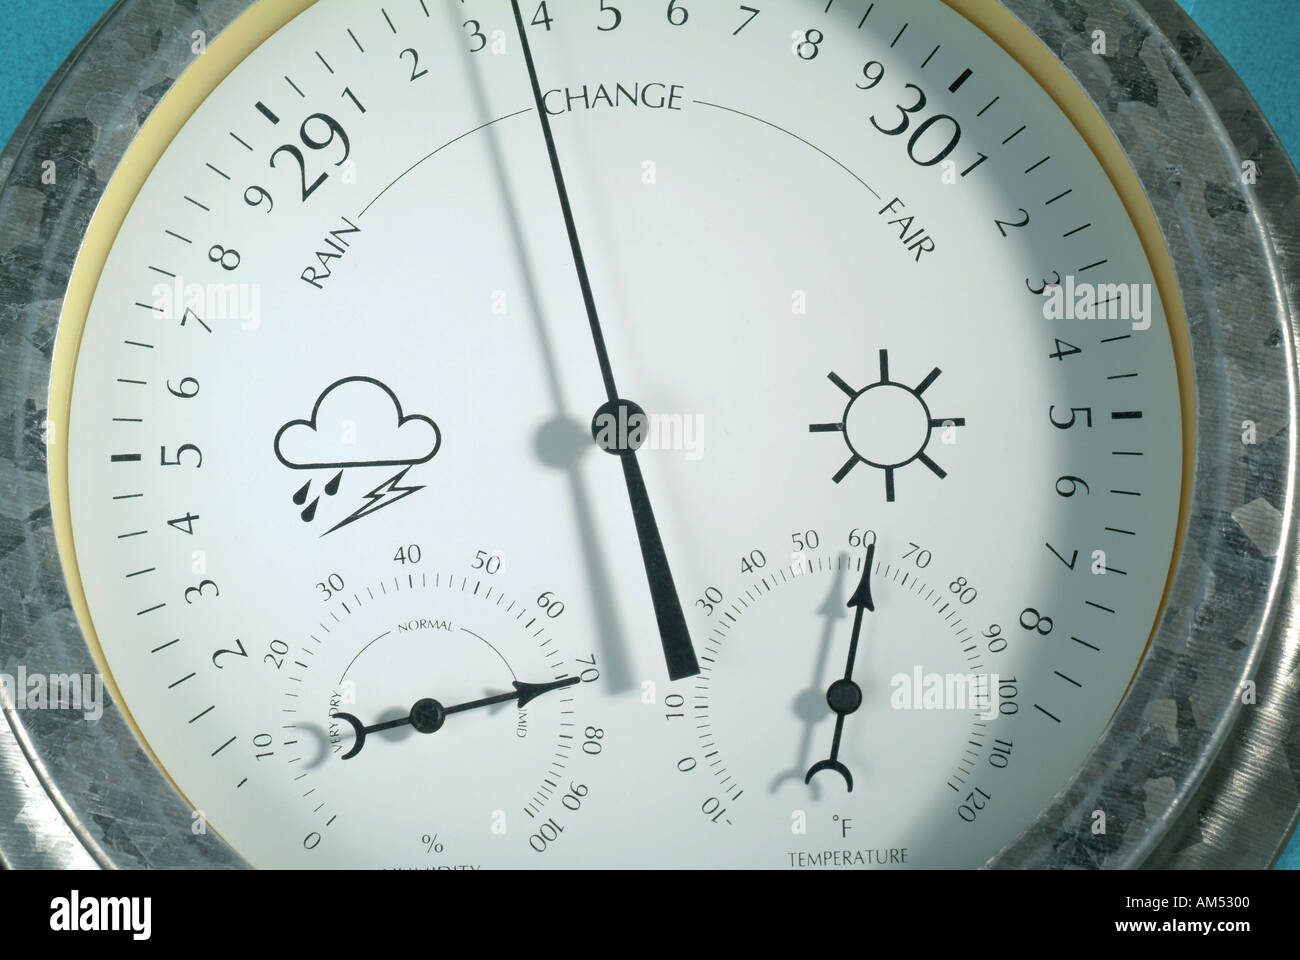 https://c8.alamy.com/comp/AM5300/close-up-of-a-weather-gauge-showing-multiple-dials-and-needles-and-AM5300.jpg